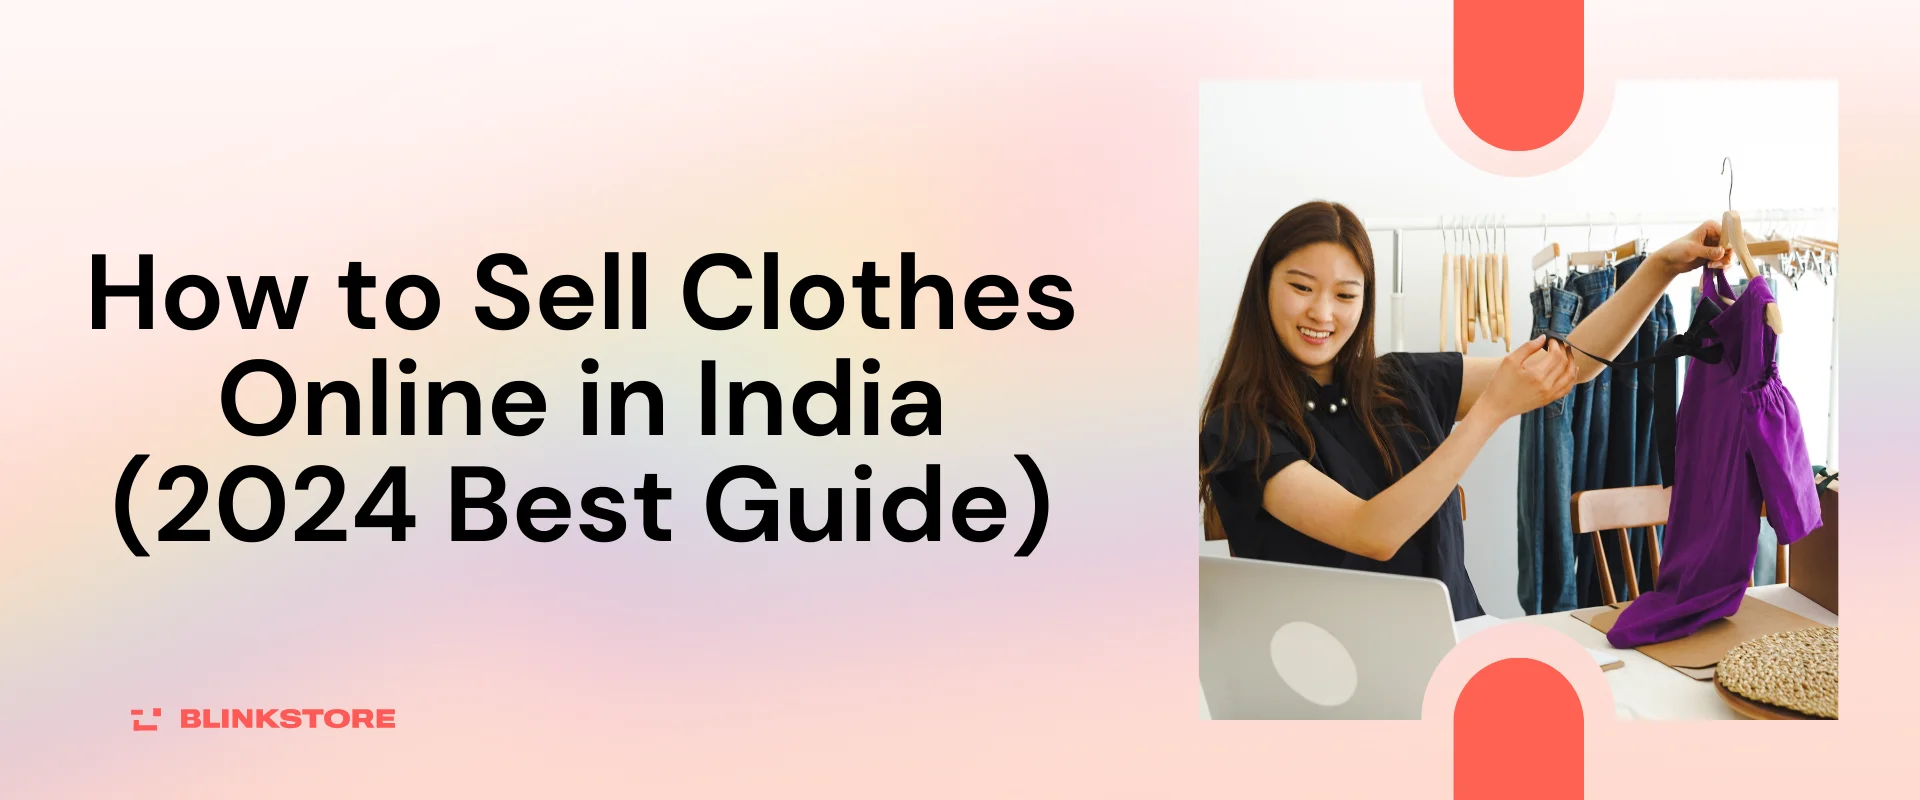 How to Sell Clothes Online in India